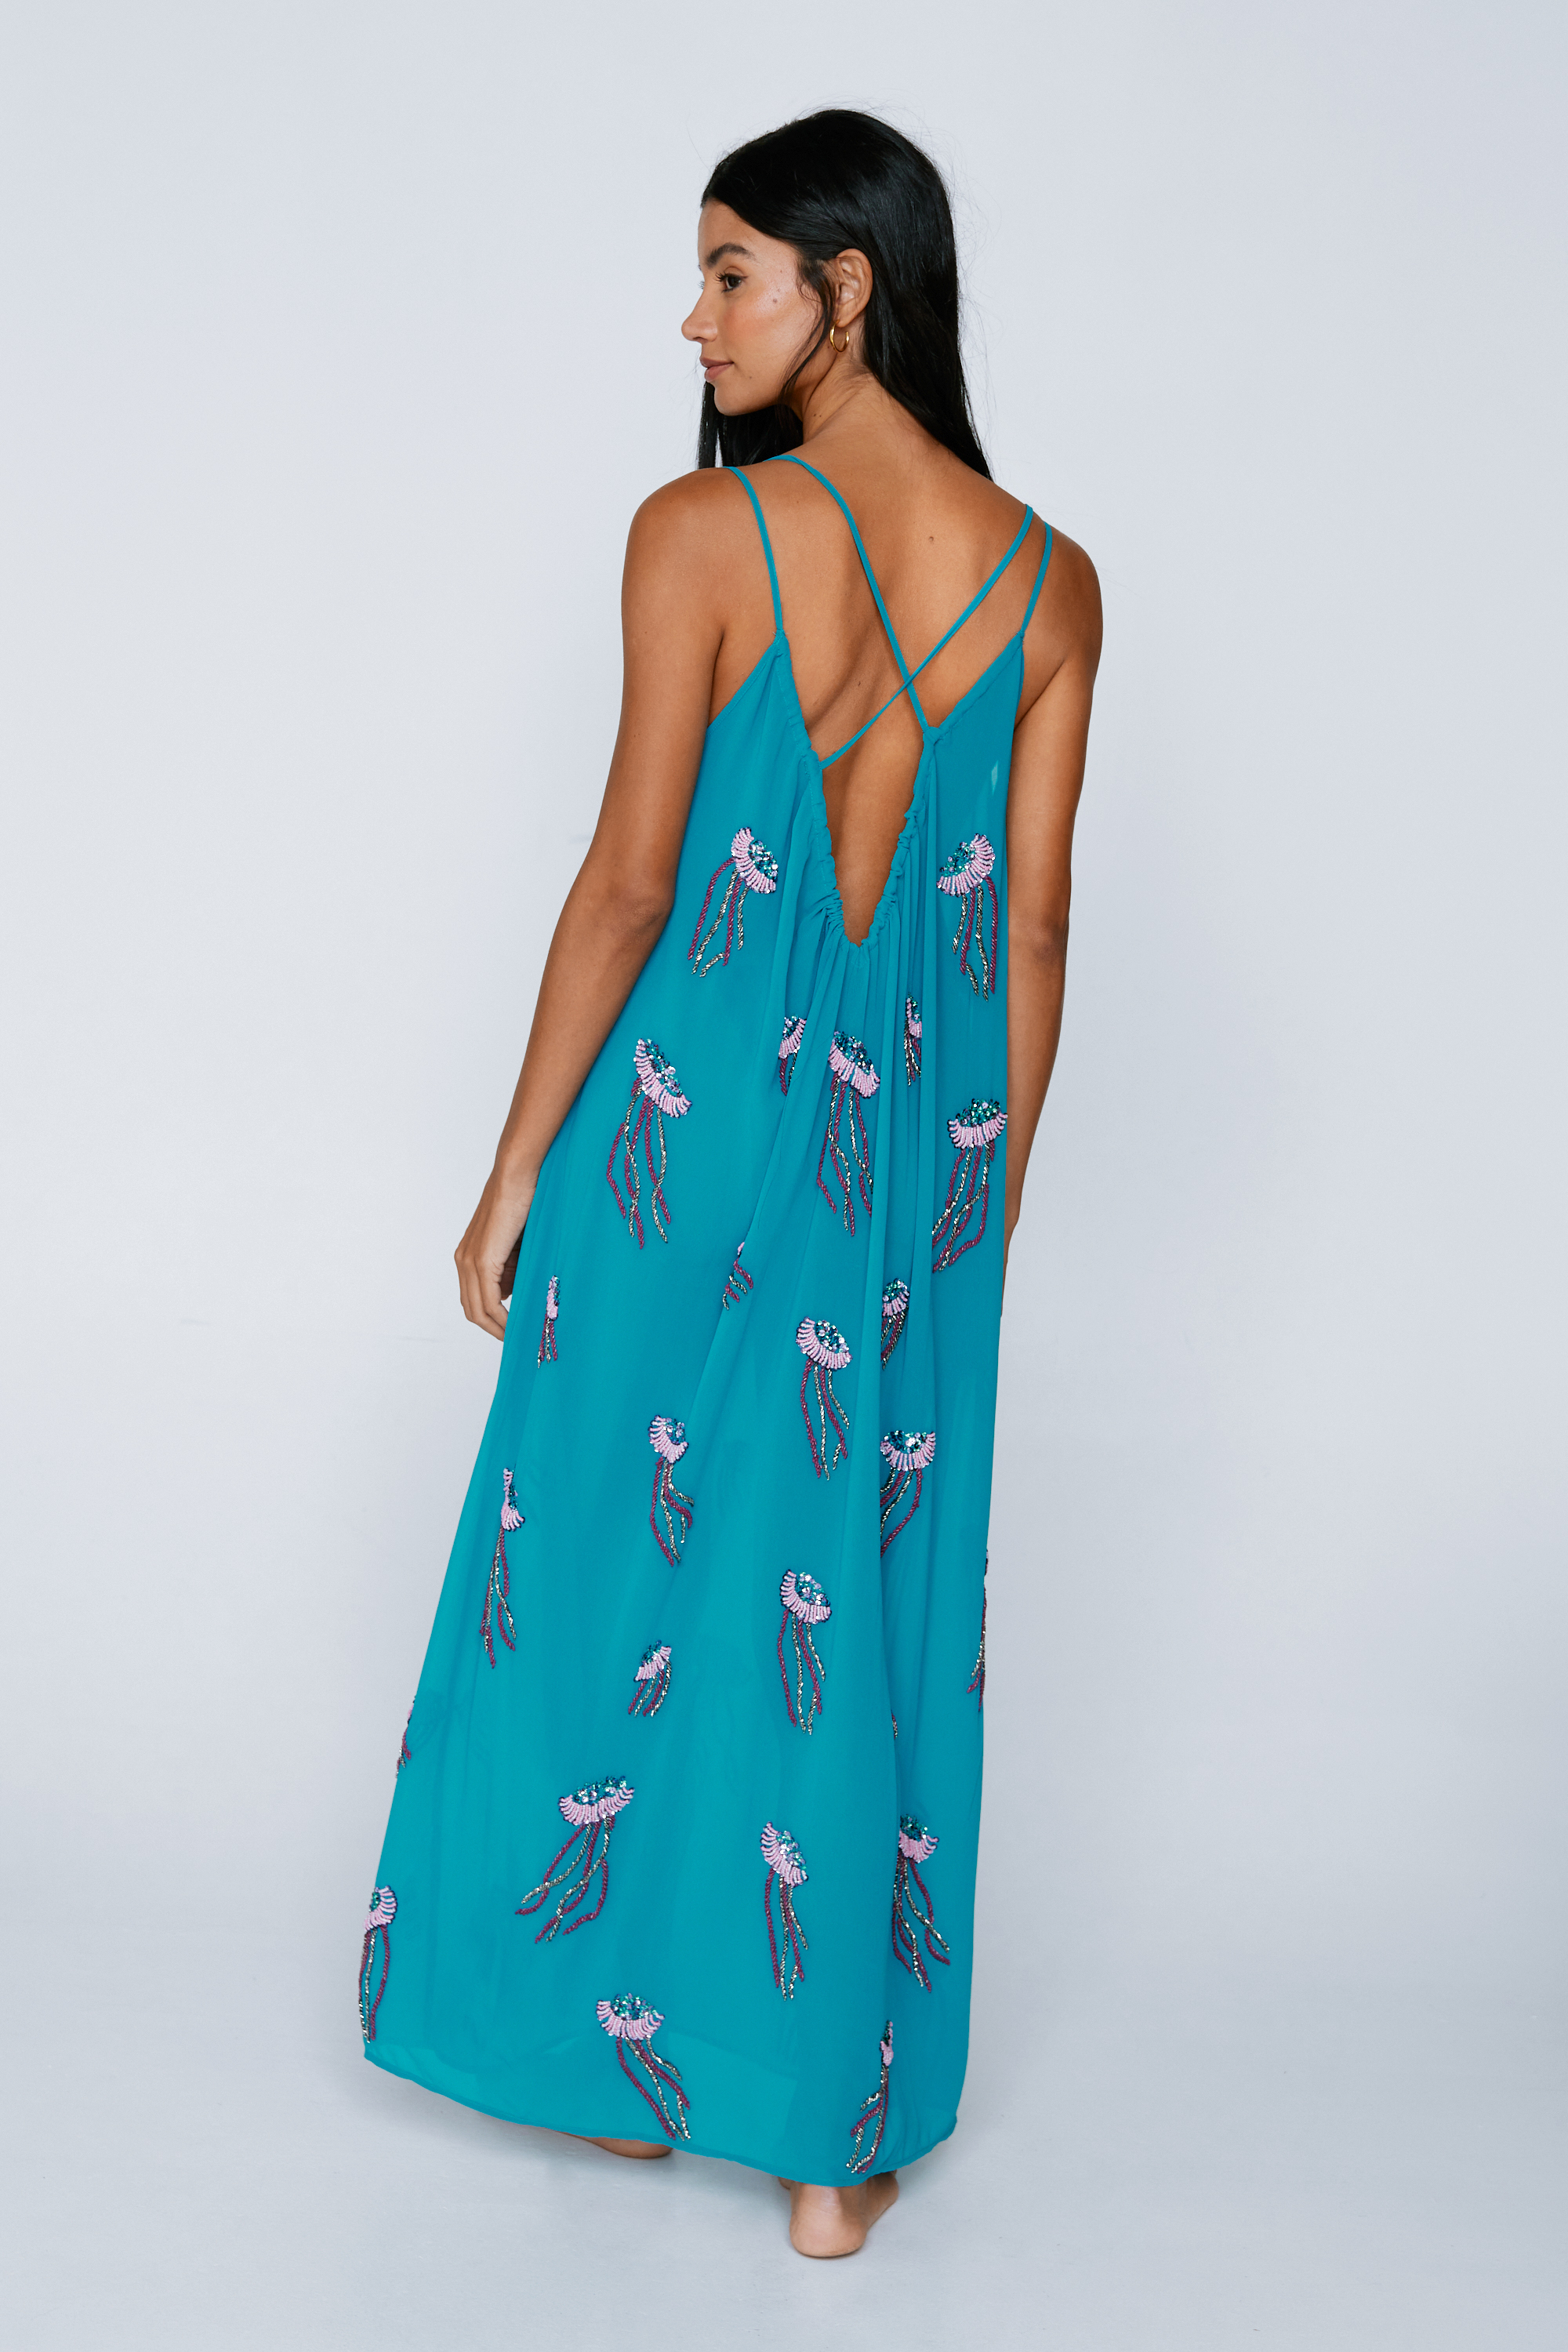 Embellished Jellyfish Maxi Cover Up Dress